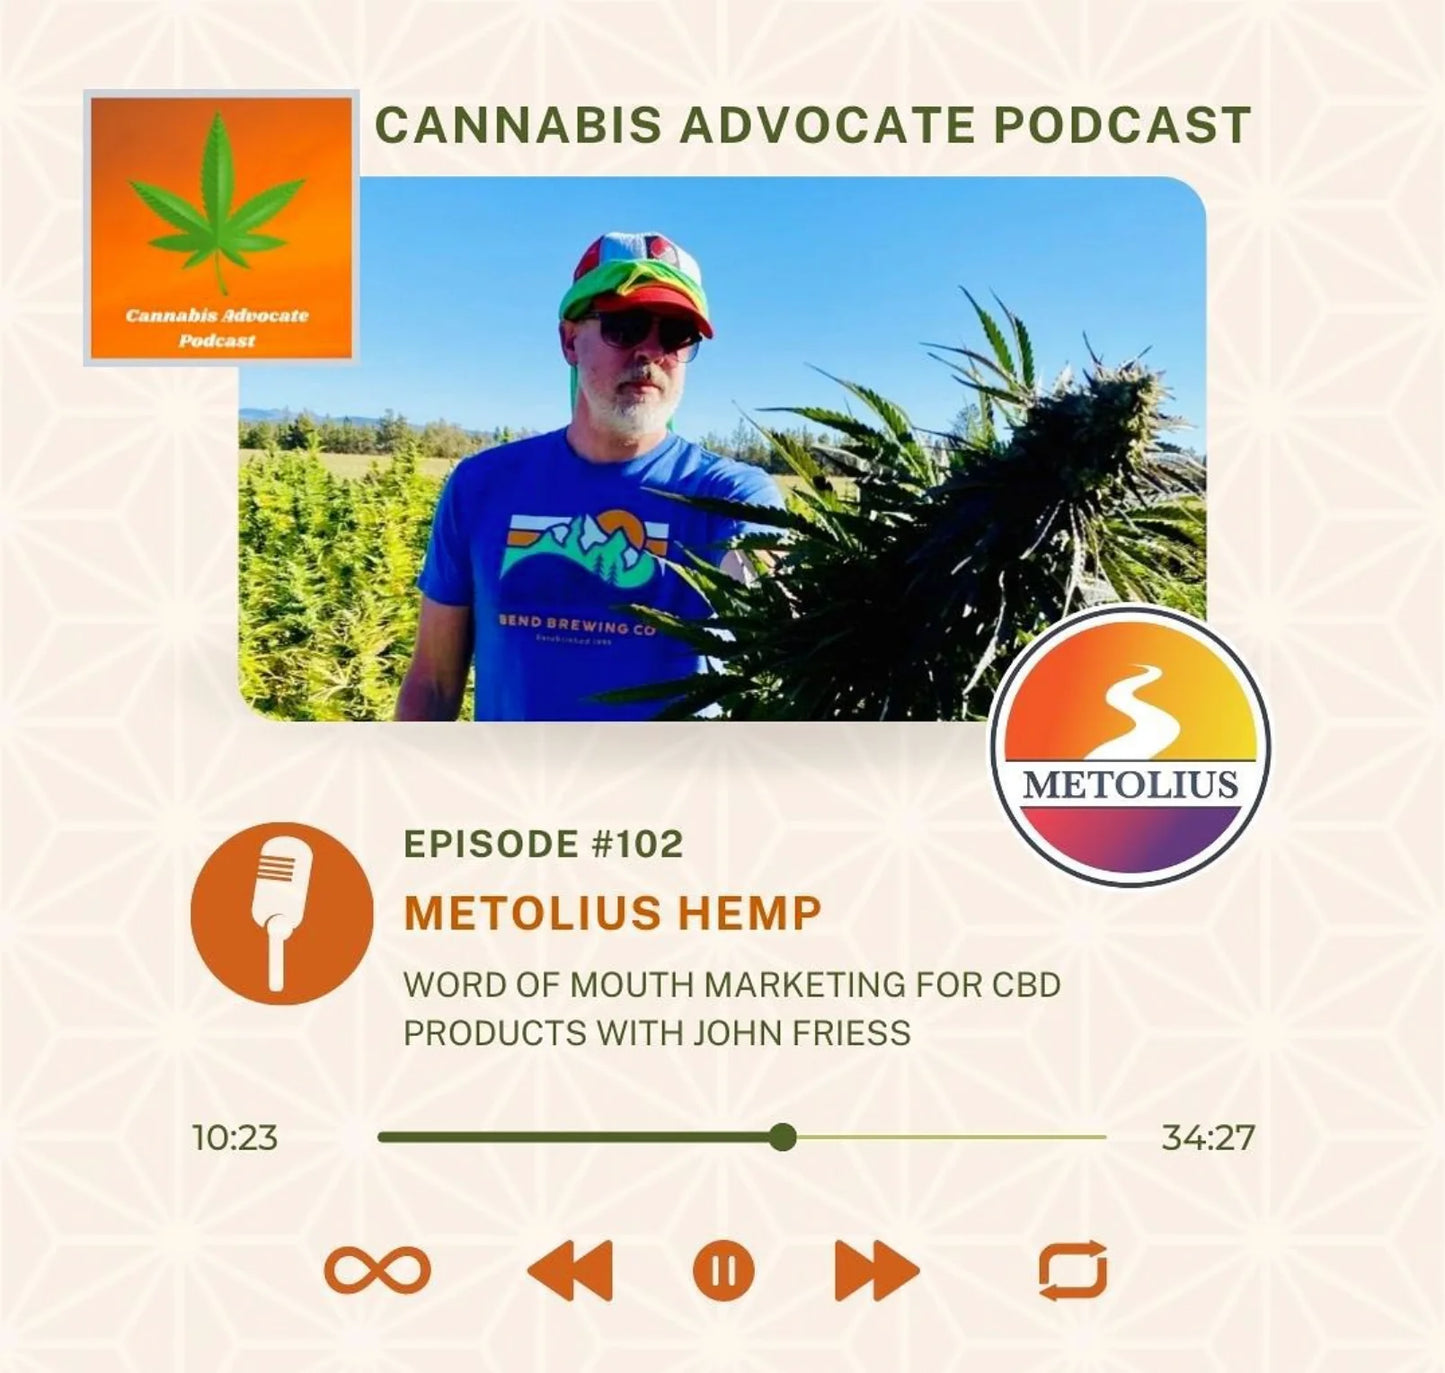 Cannabis Advocate Podcast - Word Of Mouth Marketing For CBD Products With John Friess Of Metolius Hemp